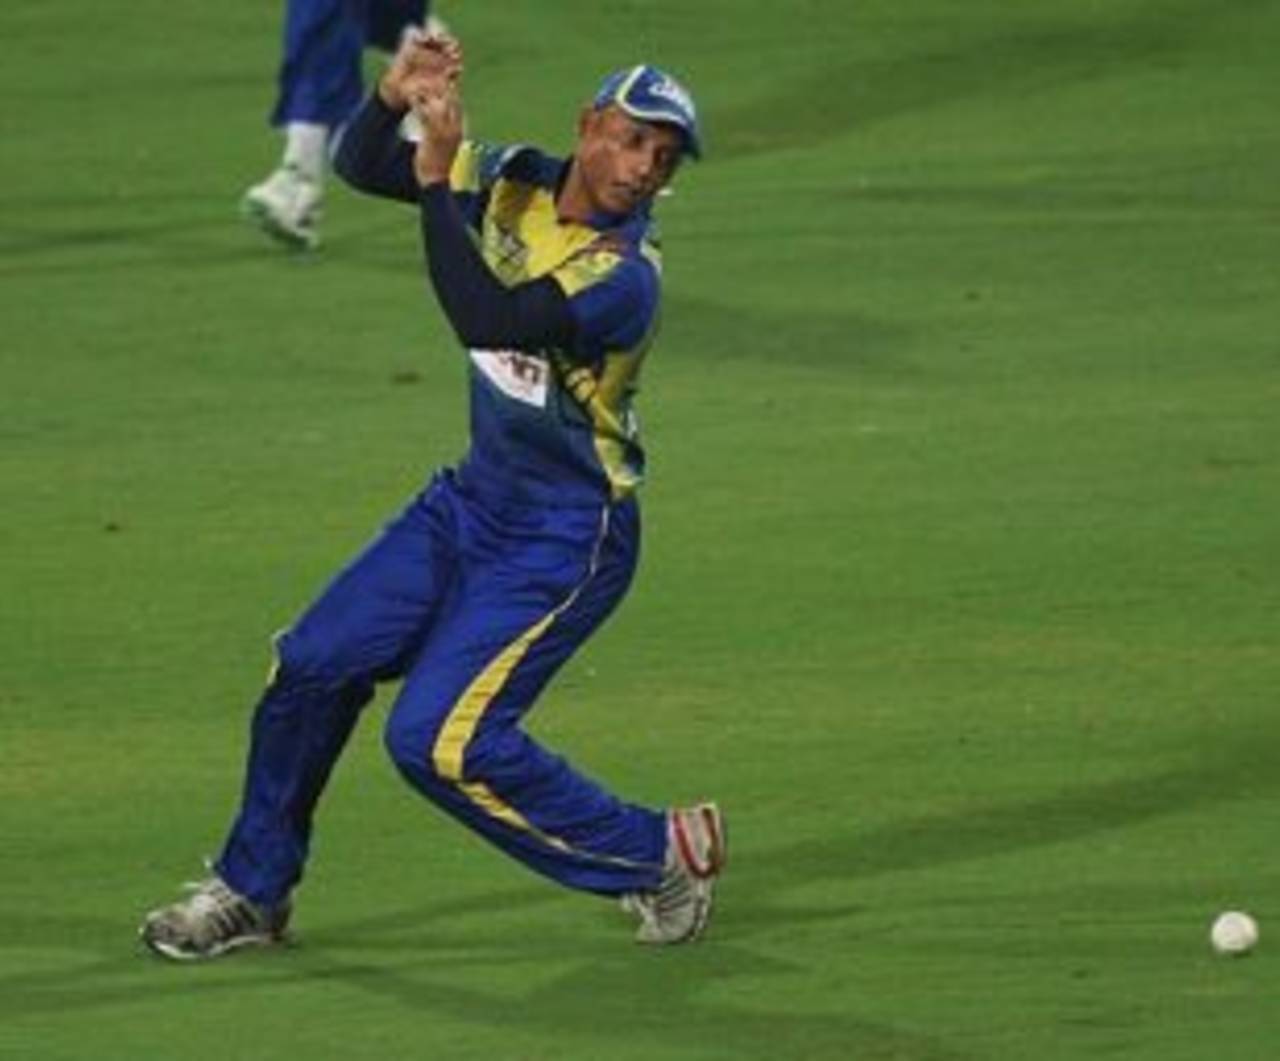 Henry Davids' two dropped catches summed up the Cobras effort in the field&nbsp;&nbsp;&bull;&nbsp;&nbsp;Global Cricket Ventures-BCCI